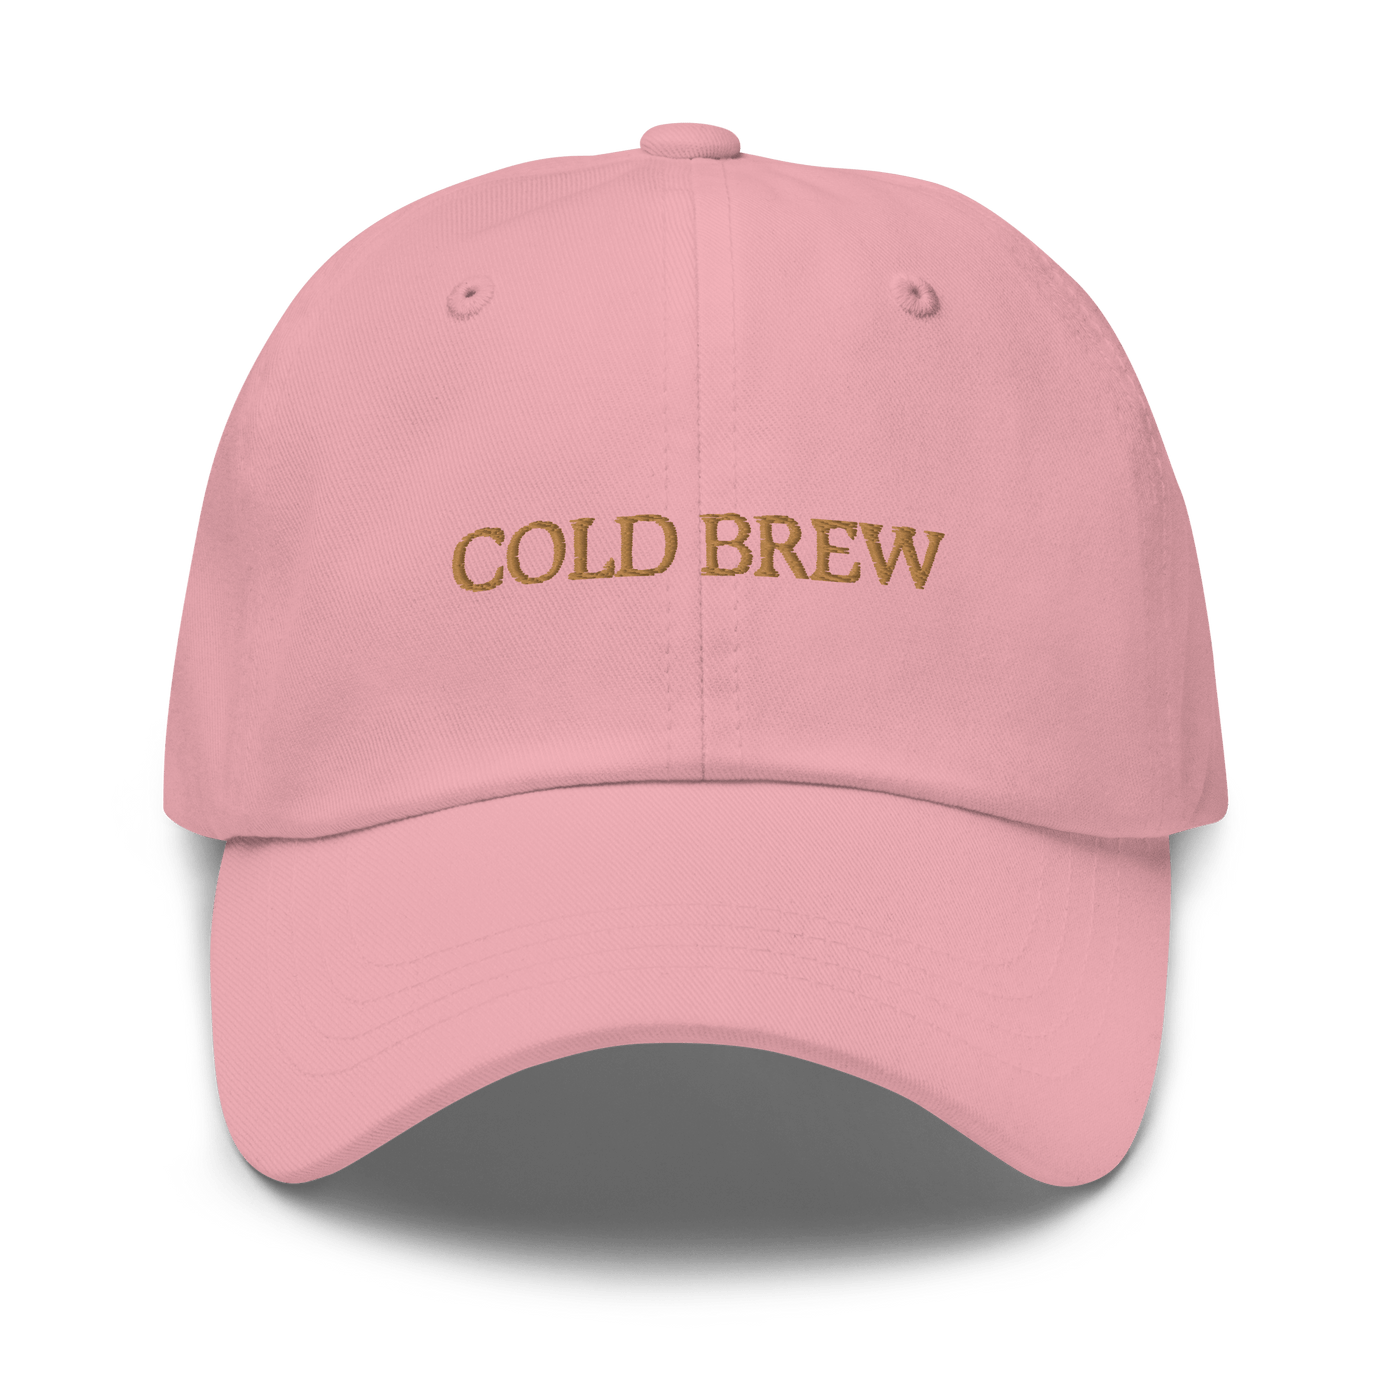 Cold Brew Dad hat - Pink - - Just Another Cap Store